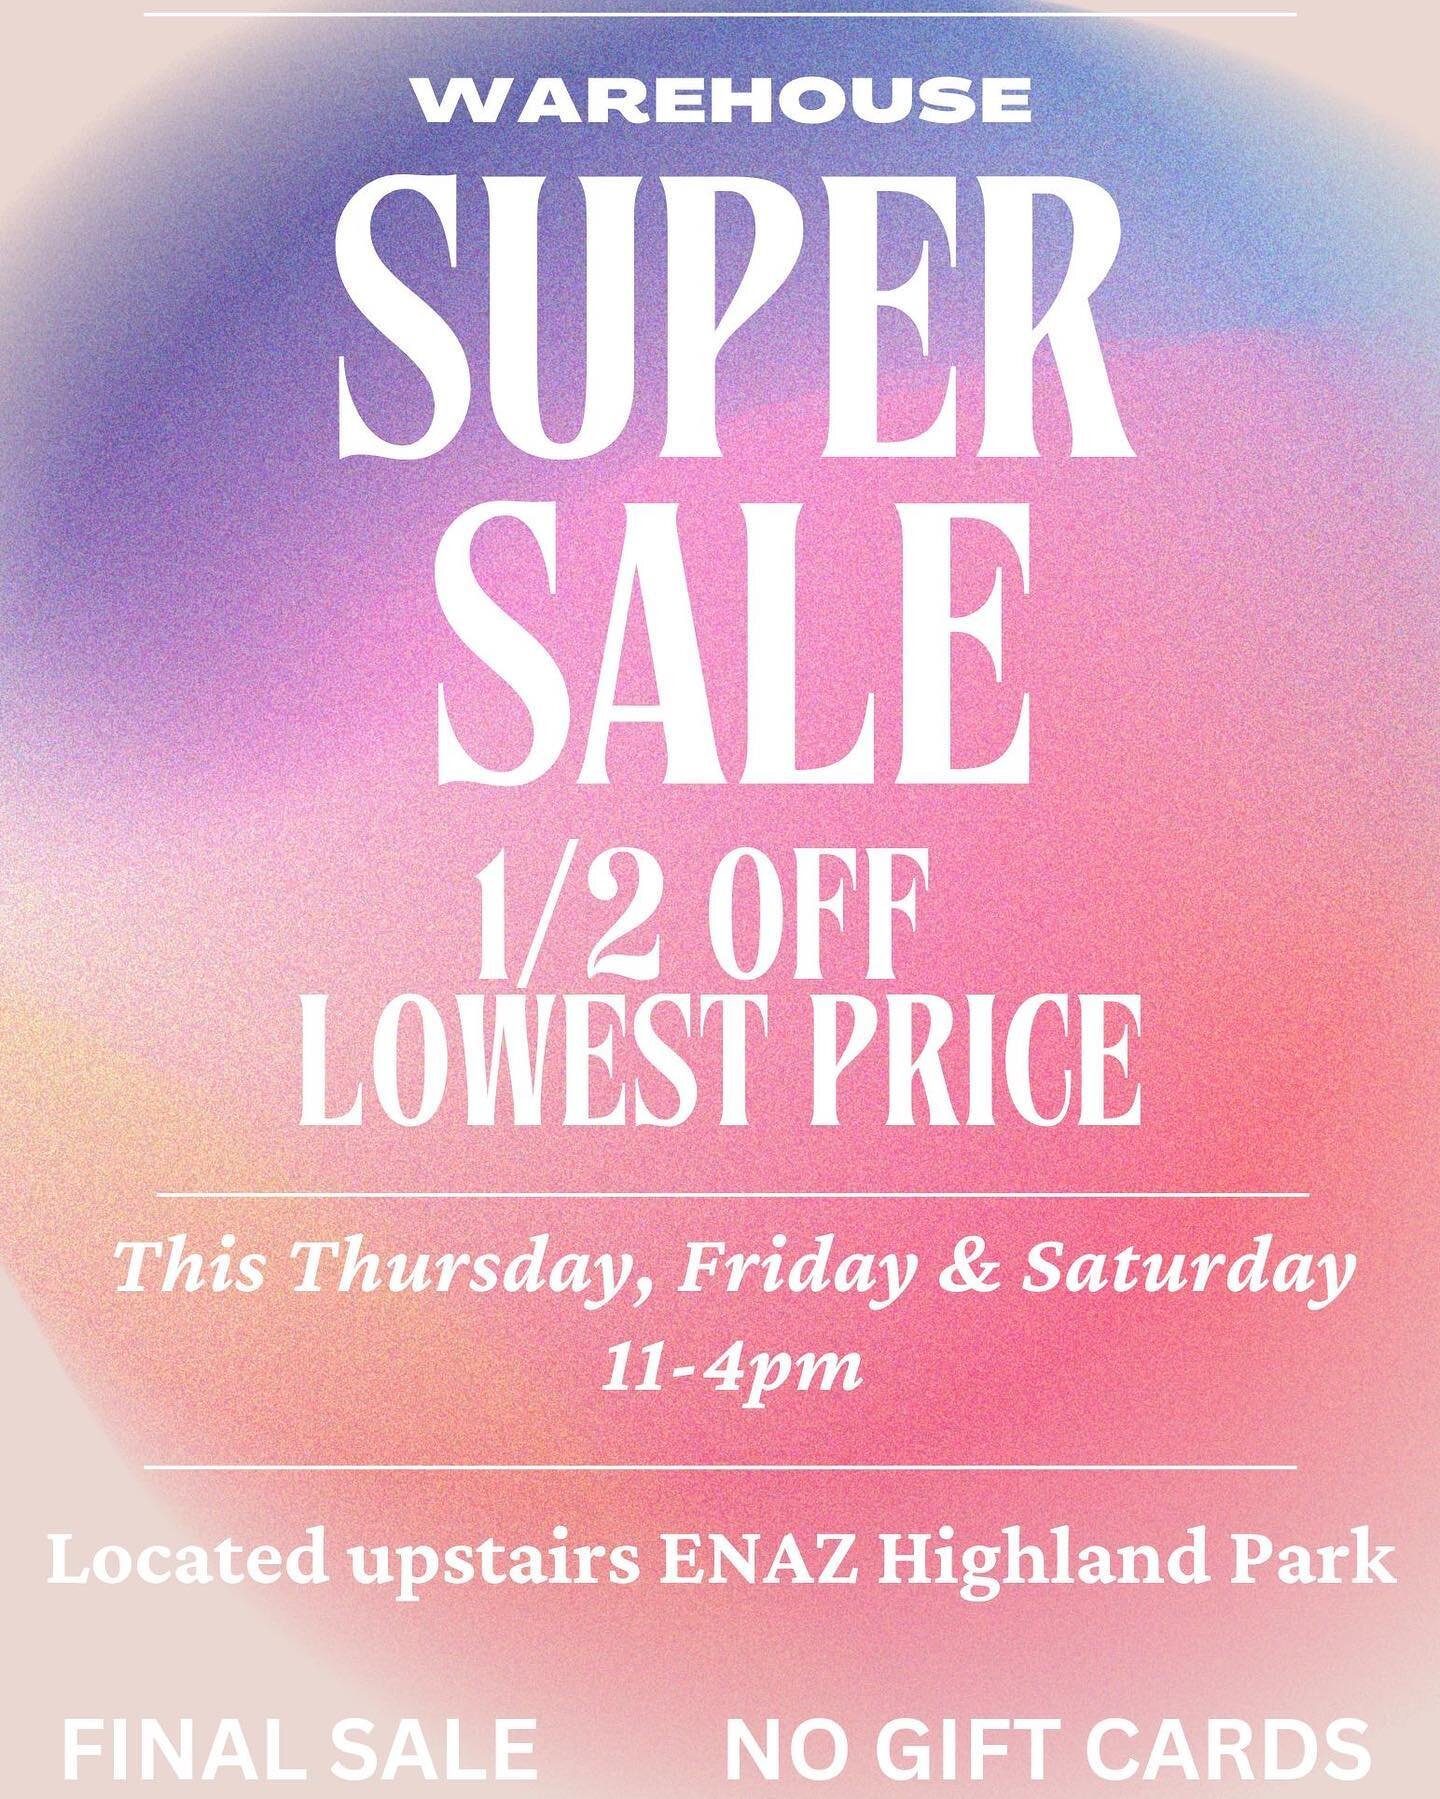 Now through Saturday, come out and join local boutique,&nbsp;@enazboutique, in Downtown Highland Park at the Warehouse Super Sale! Located upstairs at ENAZ Highland Park, take half off the lowest price of items!

#clothingboutique&nbsp;#boutique&nbsp